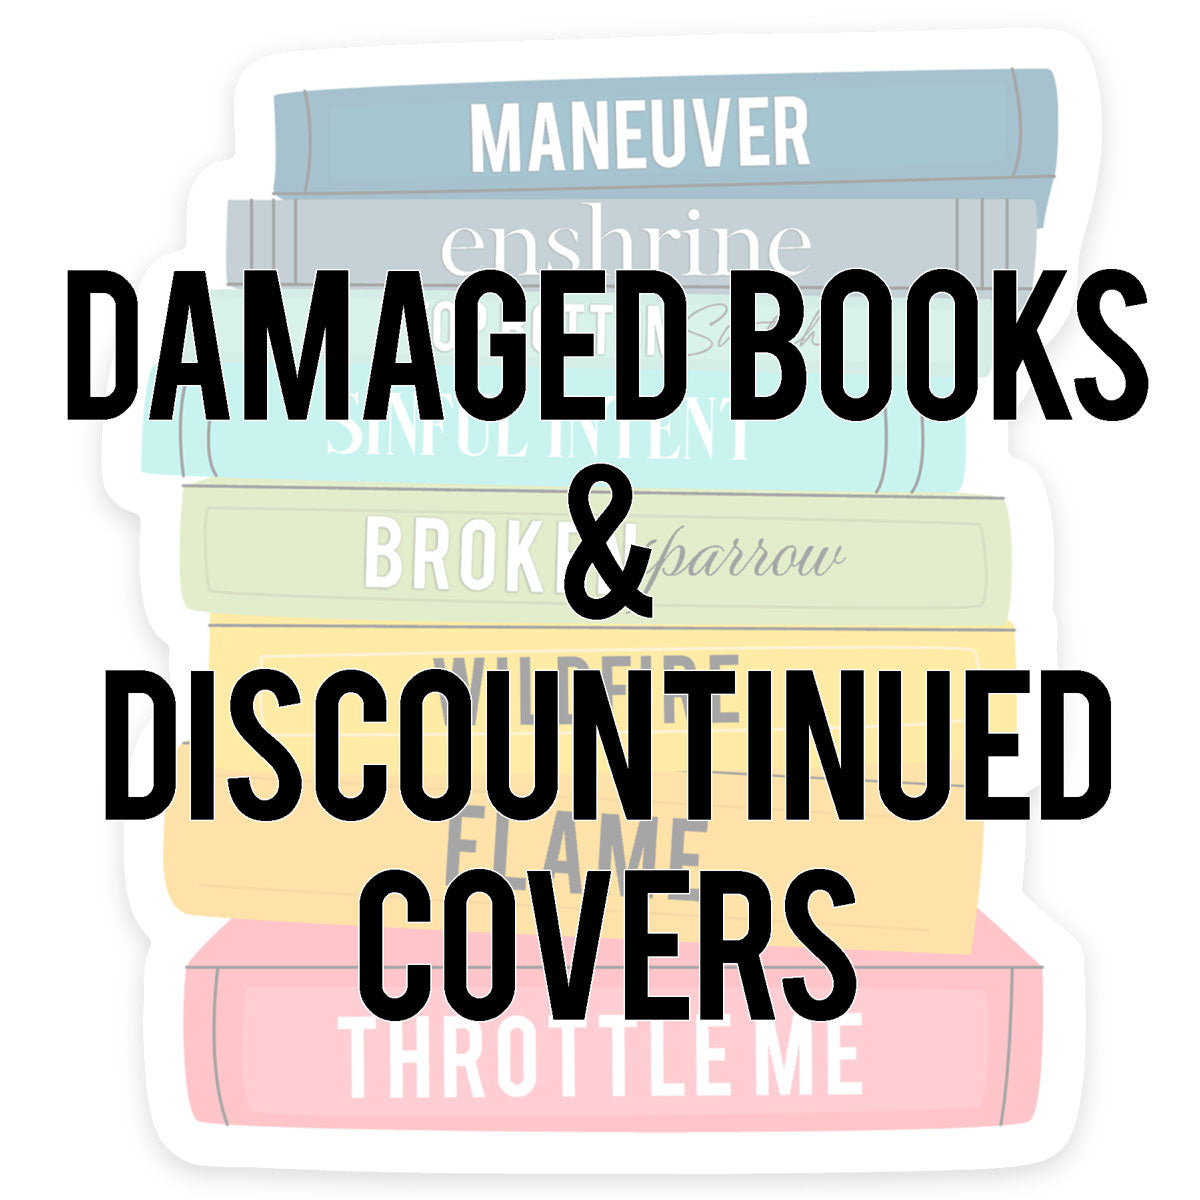 DISCONTINUED COVERS & DAMAGED BOOKS